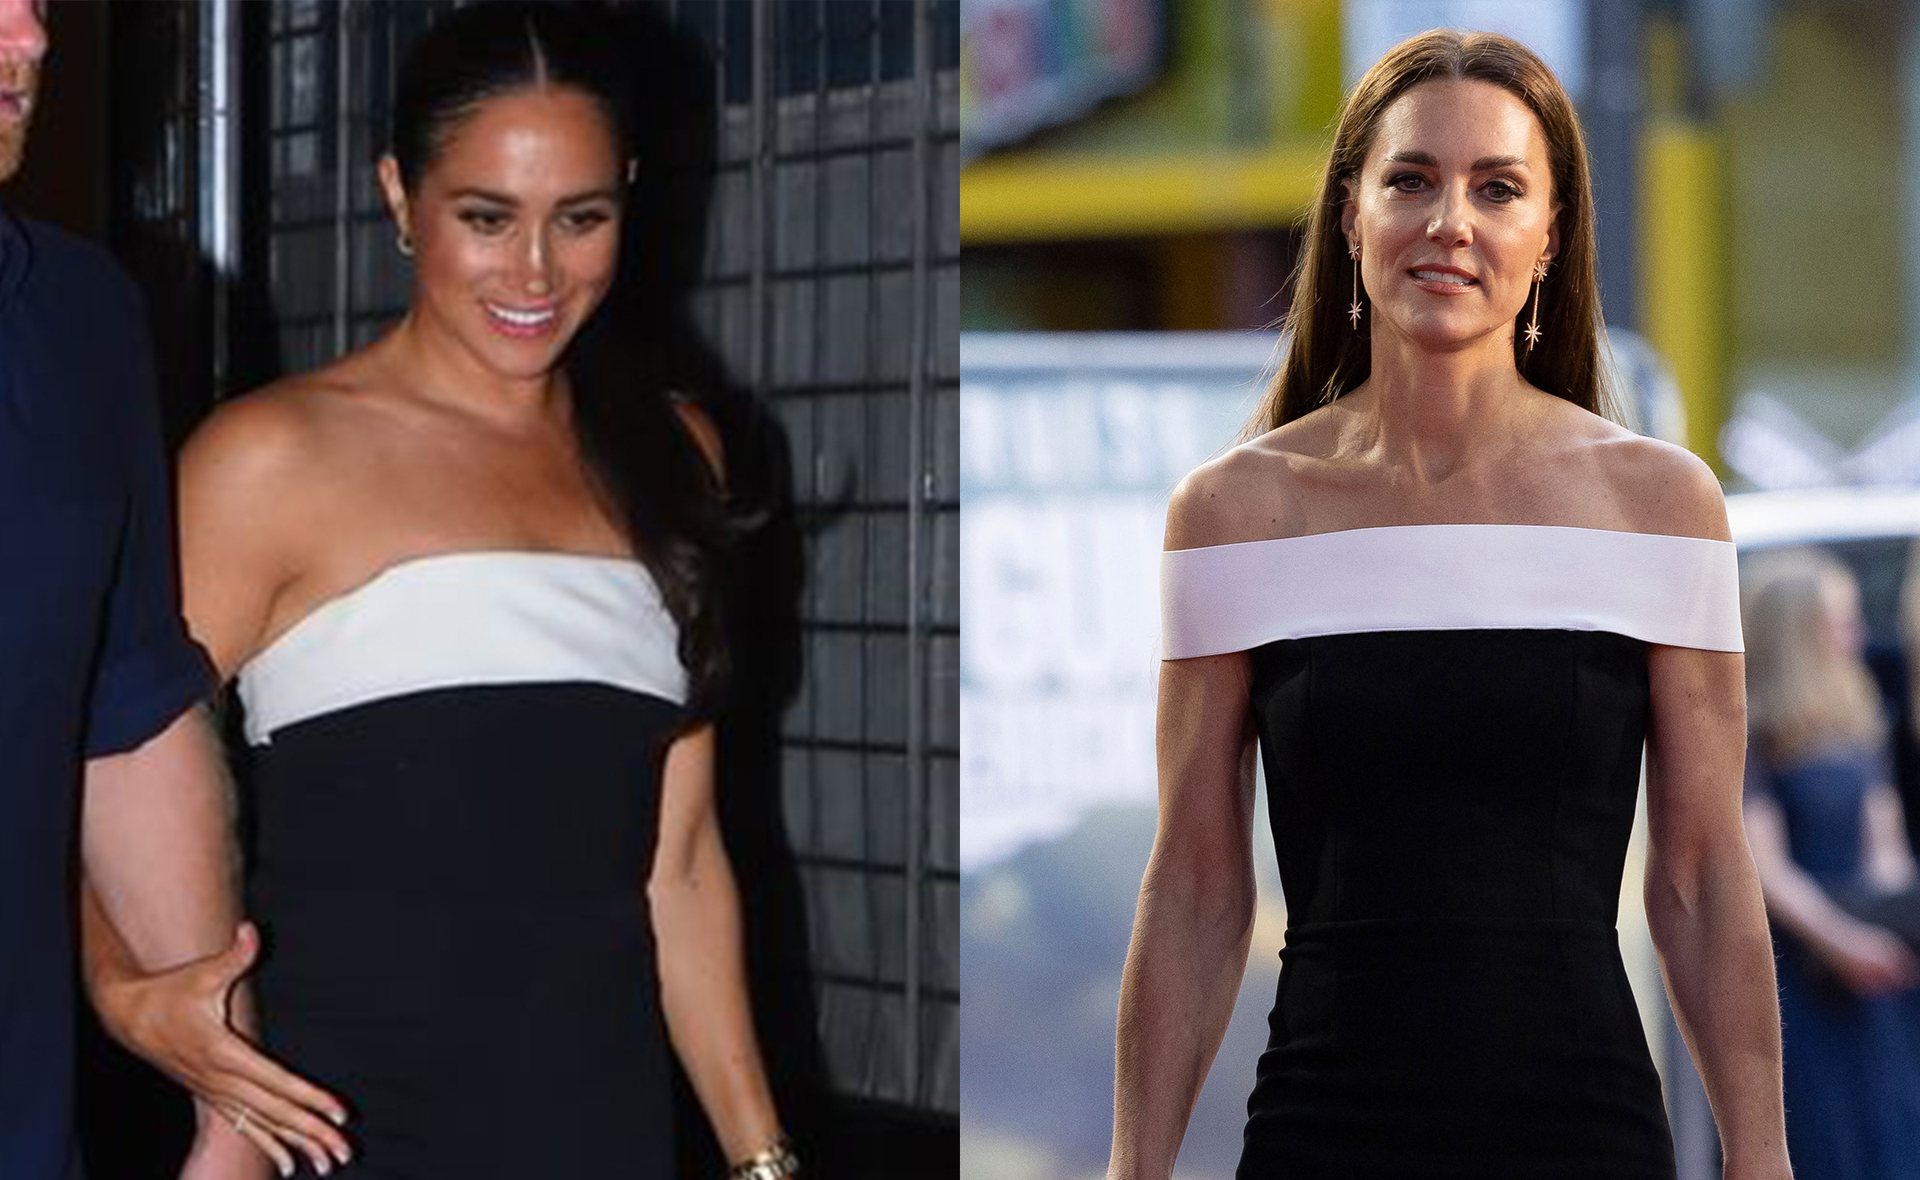 Meghan’s date night jumpsuit sparks comparisons to an iconic dress worn by her royal relative Catherine